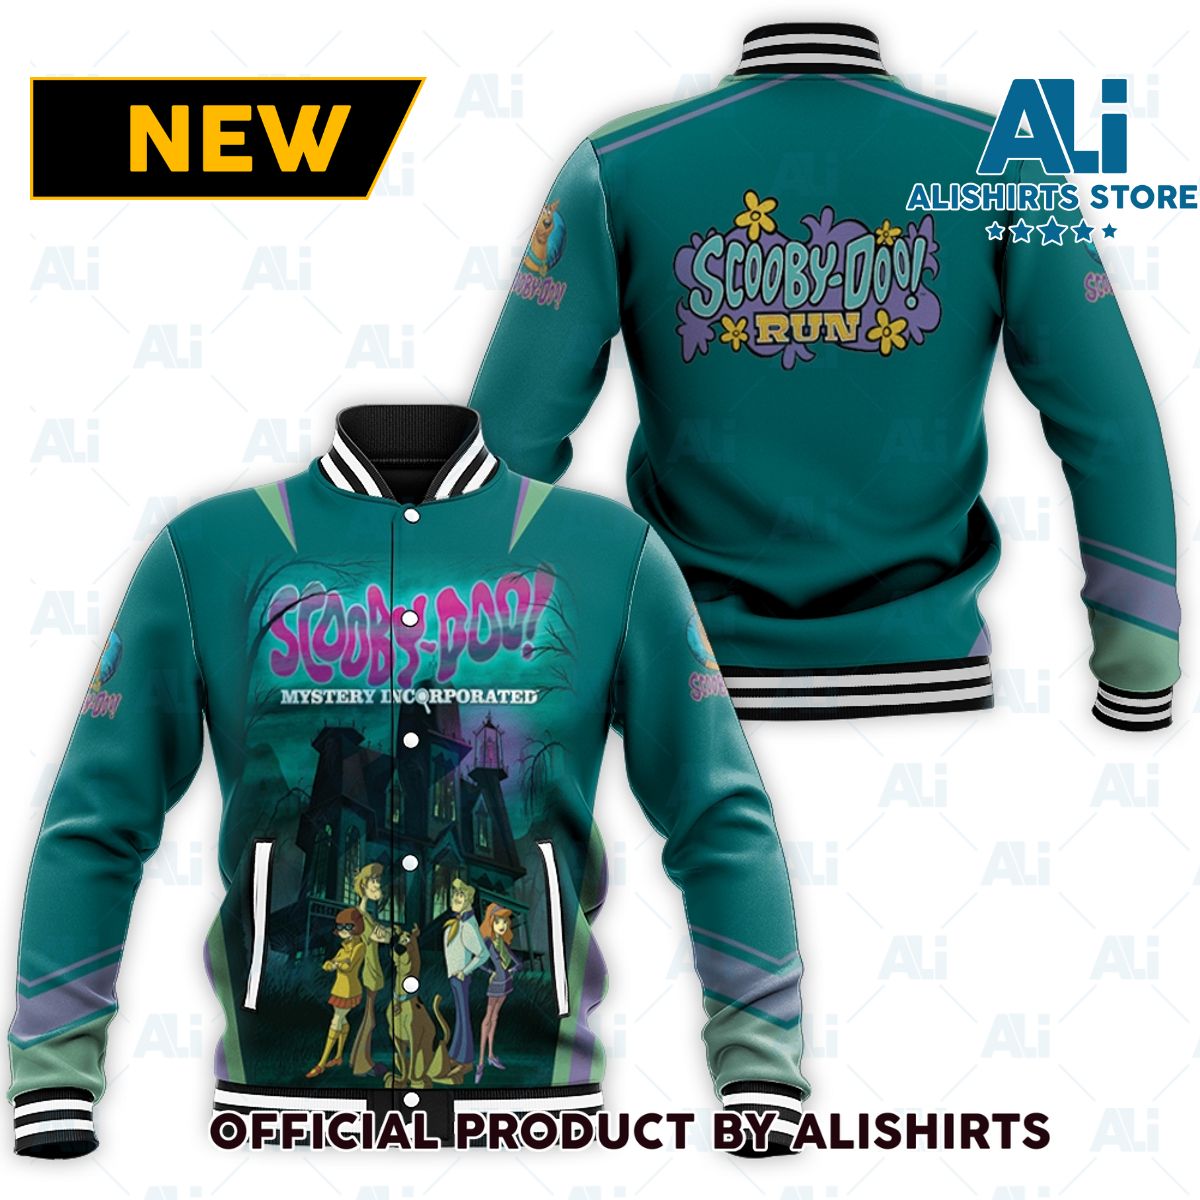 Scooby doo mystery incorporated mansion castle Halloween varsity jacket